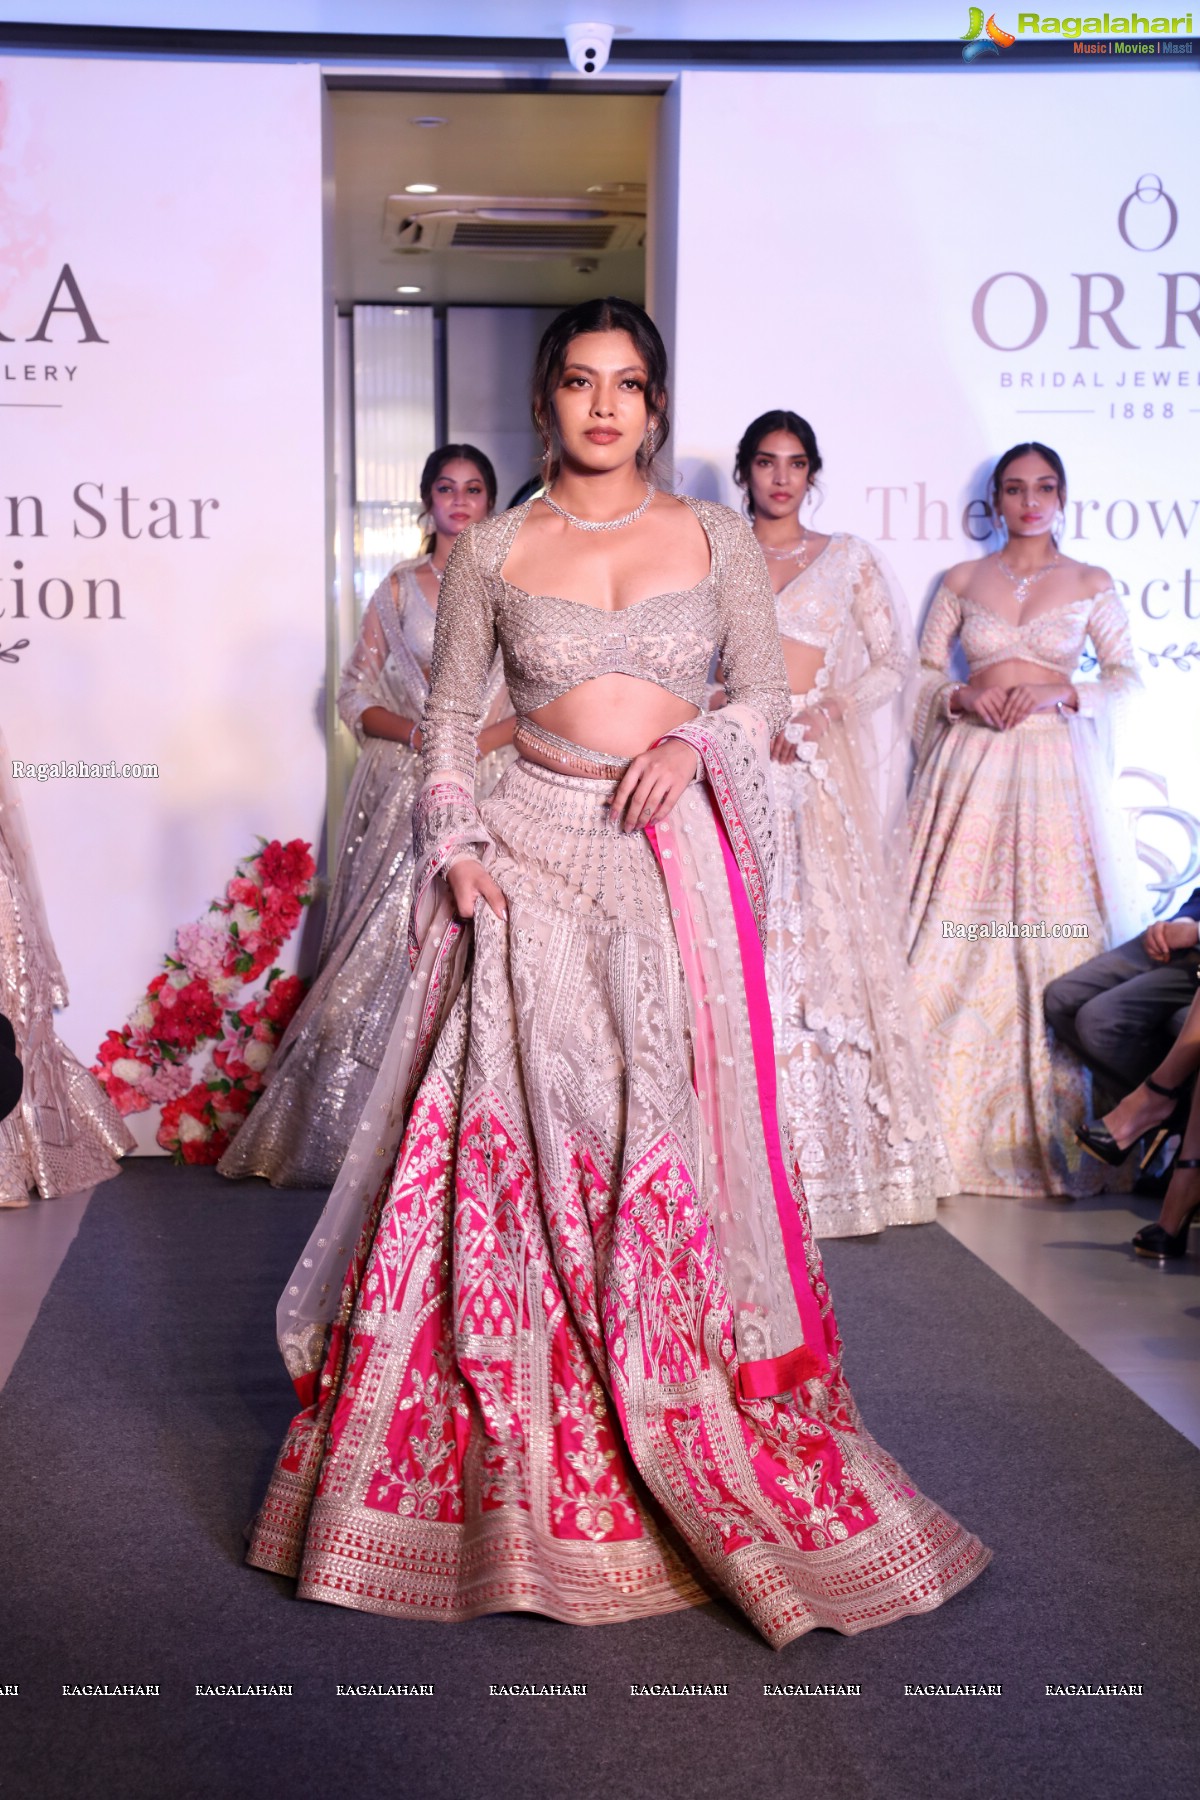 ORRA Bridal Jewellery Launches The Crown Star Collection - an Exciting New Collection